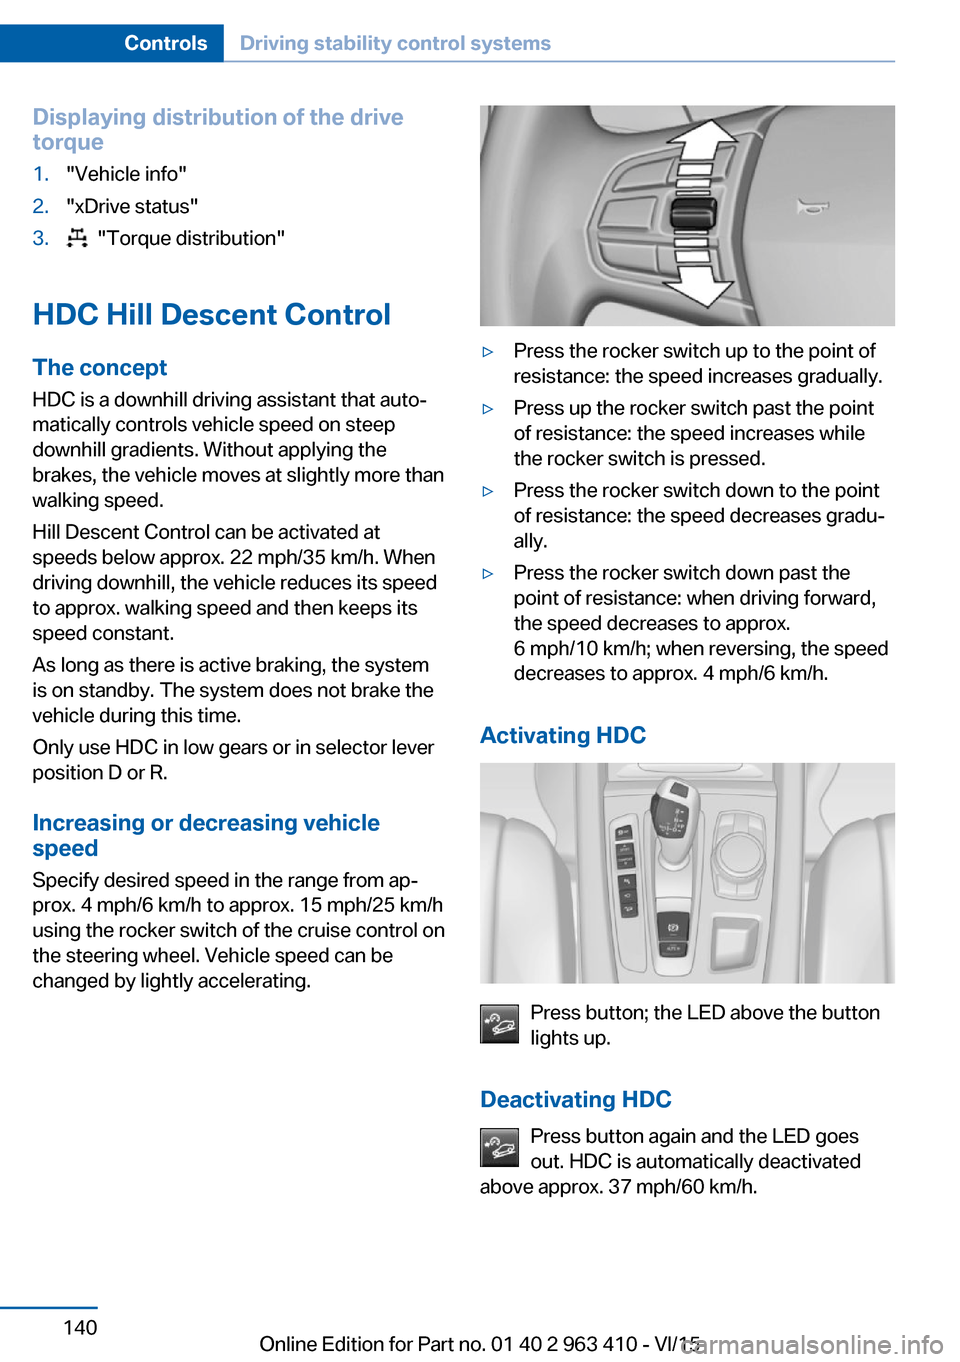 BMW X5 2015 F15 Owners Guide Displaying distribution of the drive
torque1."Vehicle info"2."xDrive status"3.  "Torque distribution"
HDC Hill Descent Control
The concept HDC is a downhill driving assistant that auto‐
matically co